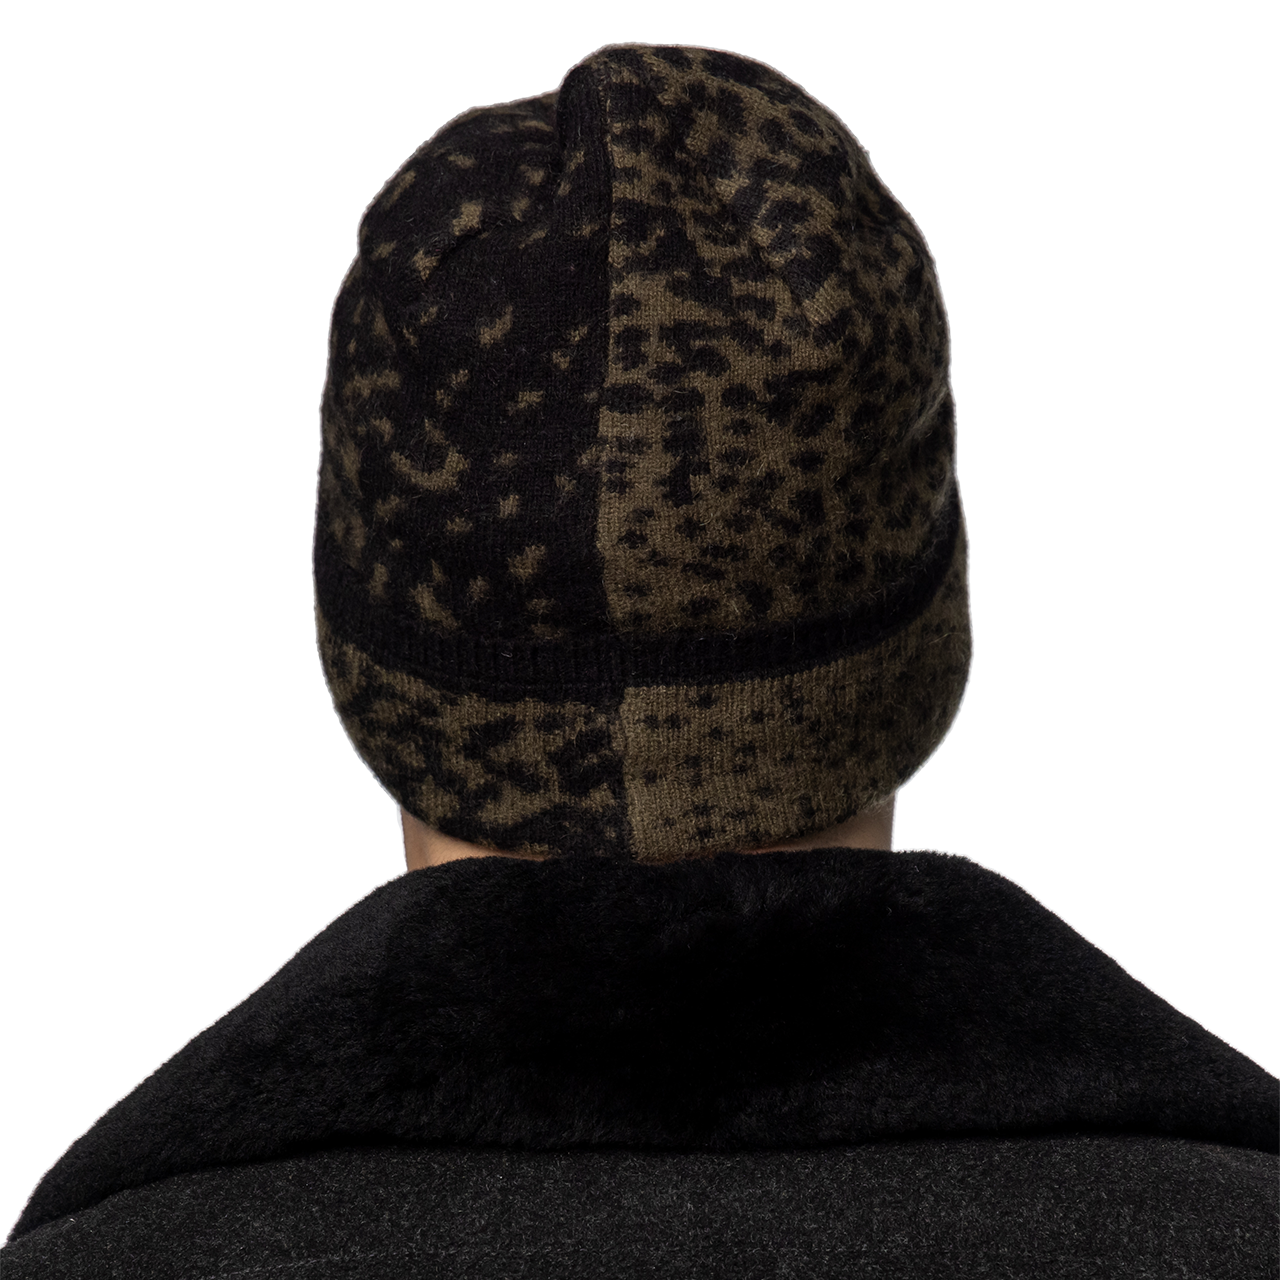 Cashmere Slouchy Beanie with Contrast Intarsia - Duffle Bag/Black